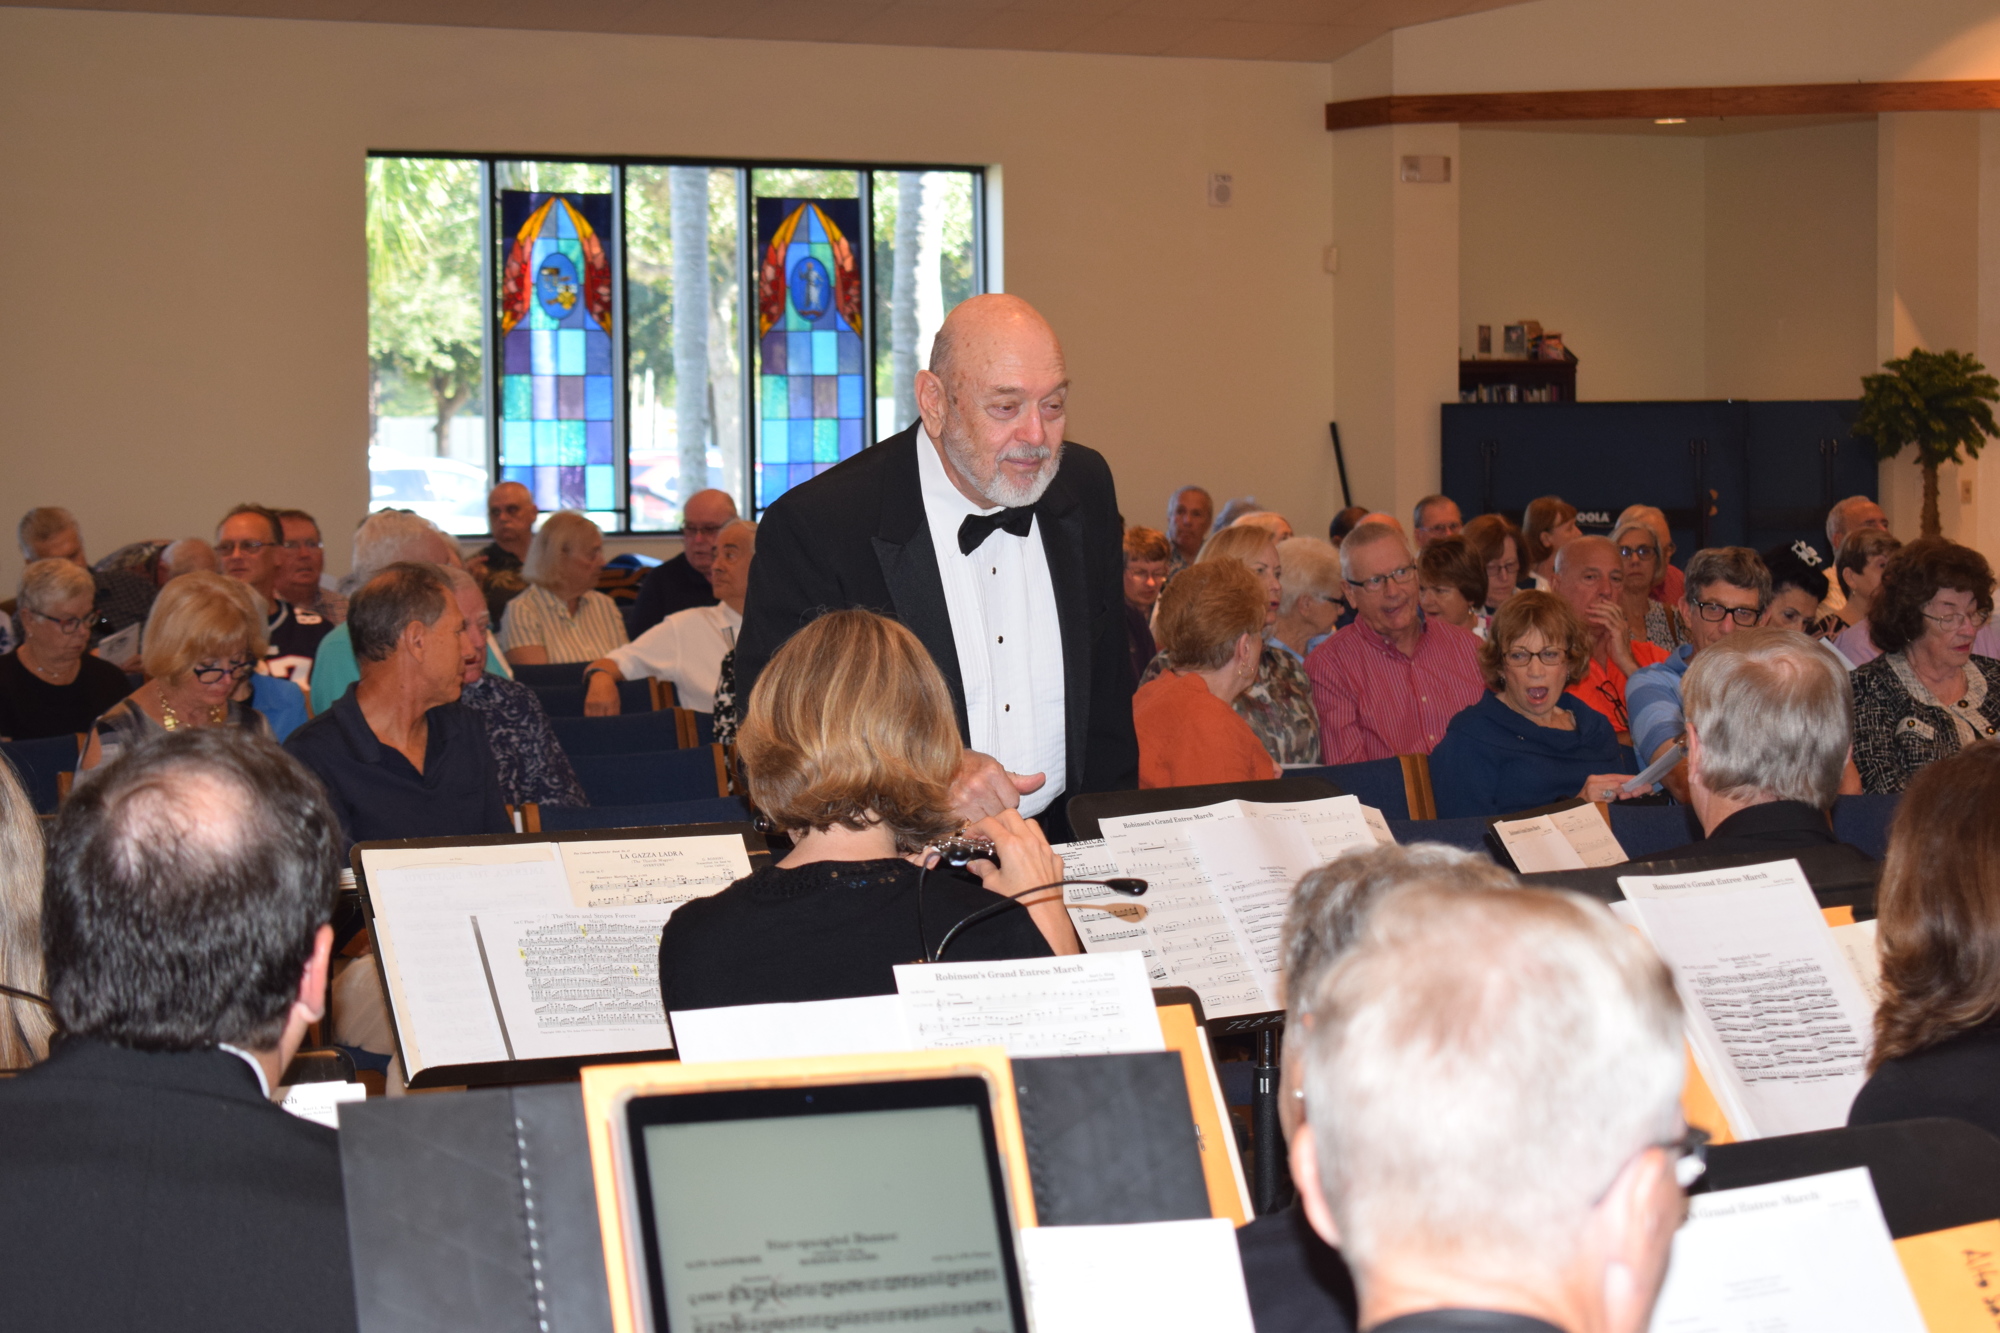 Conductor Joe Miller leads the Lakewood Ranch Wind Ensemble during the band's debut in November, 2019 at Our Lady of the Angels Catholic Church.